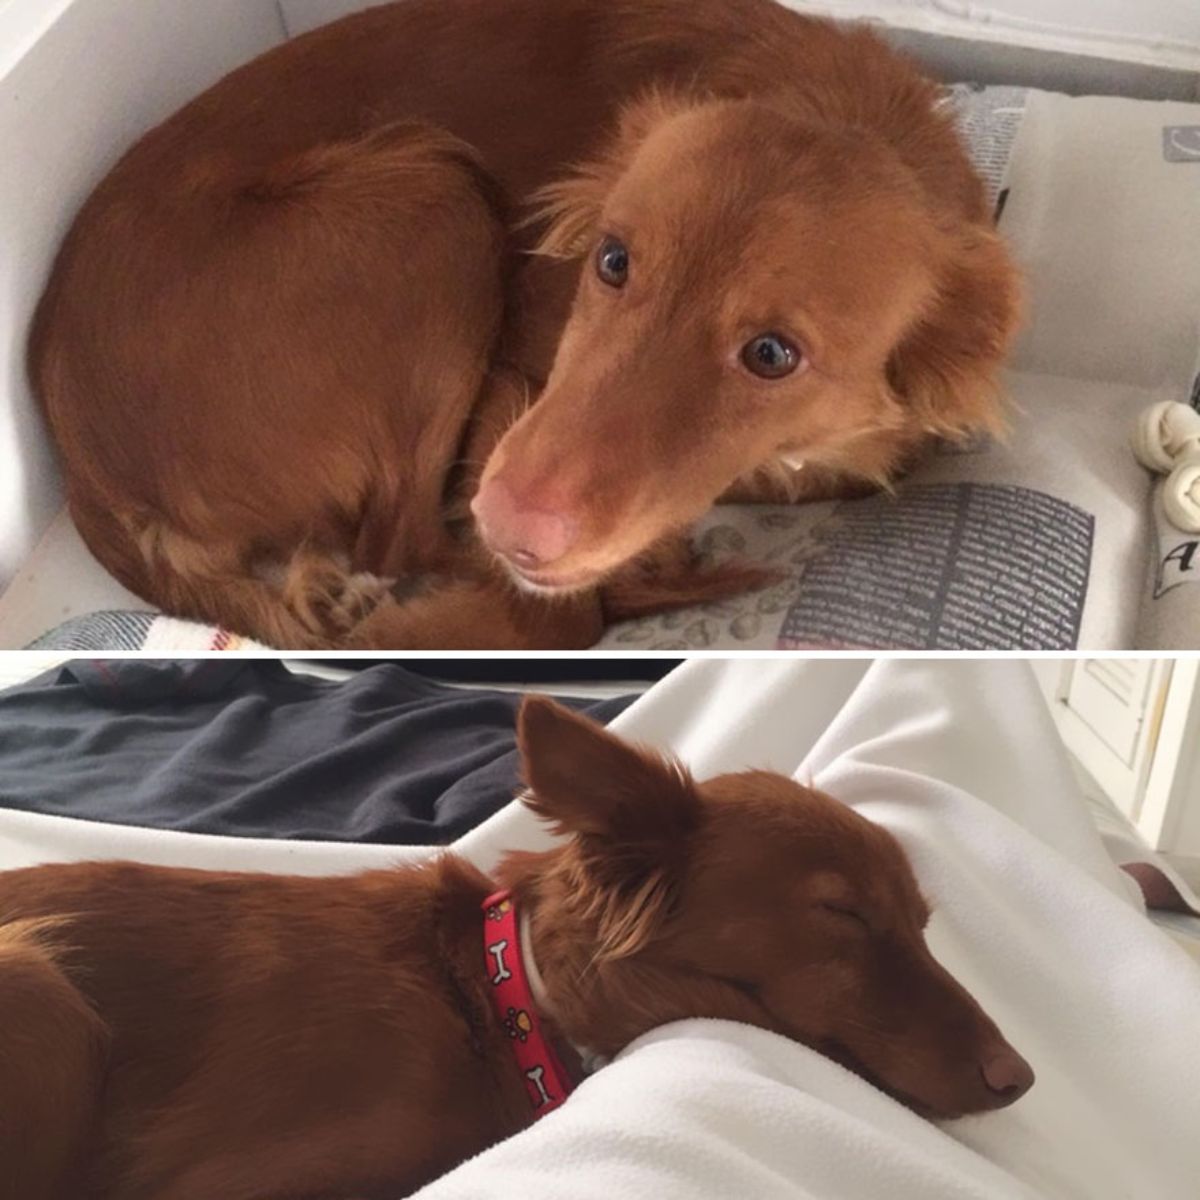 before photo of sad and scared brown dog and after photo of brown dog sleeping on white bed